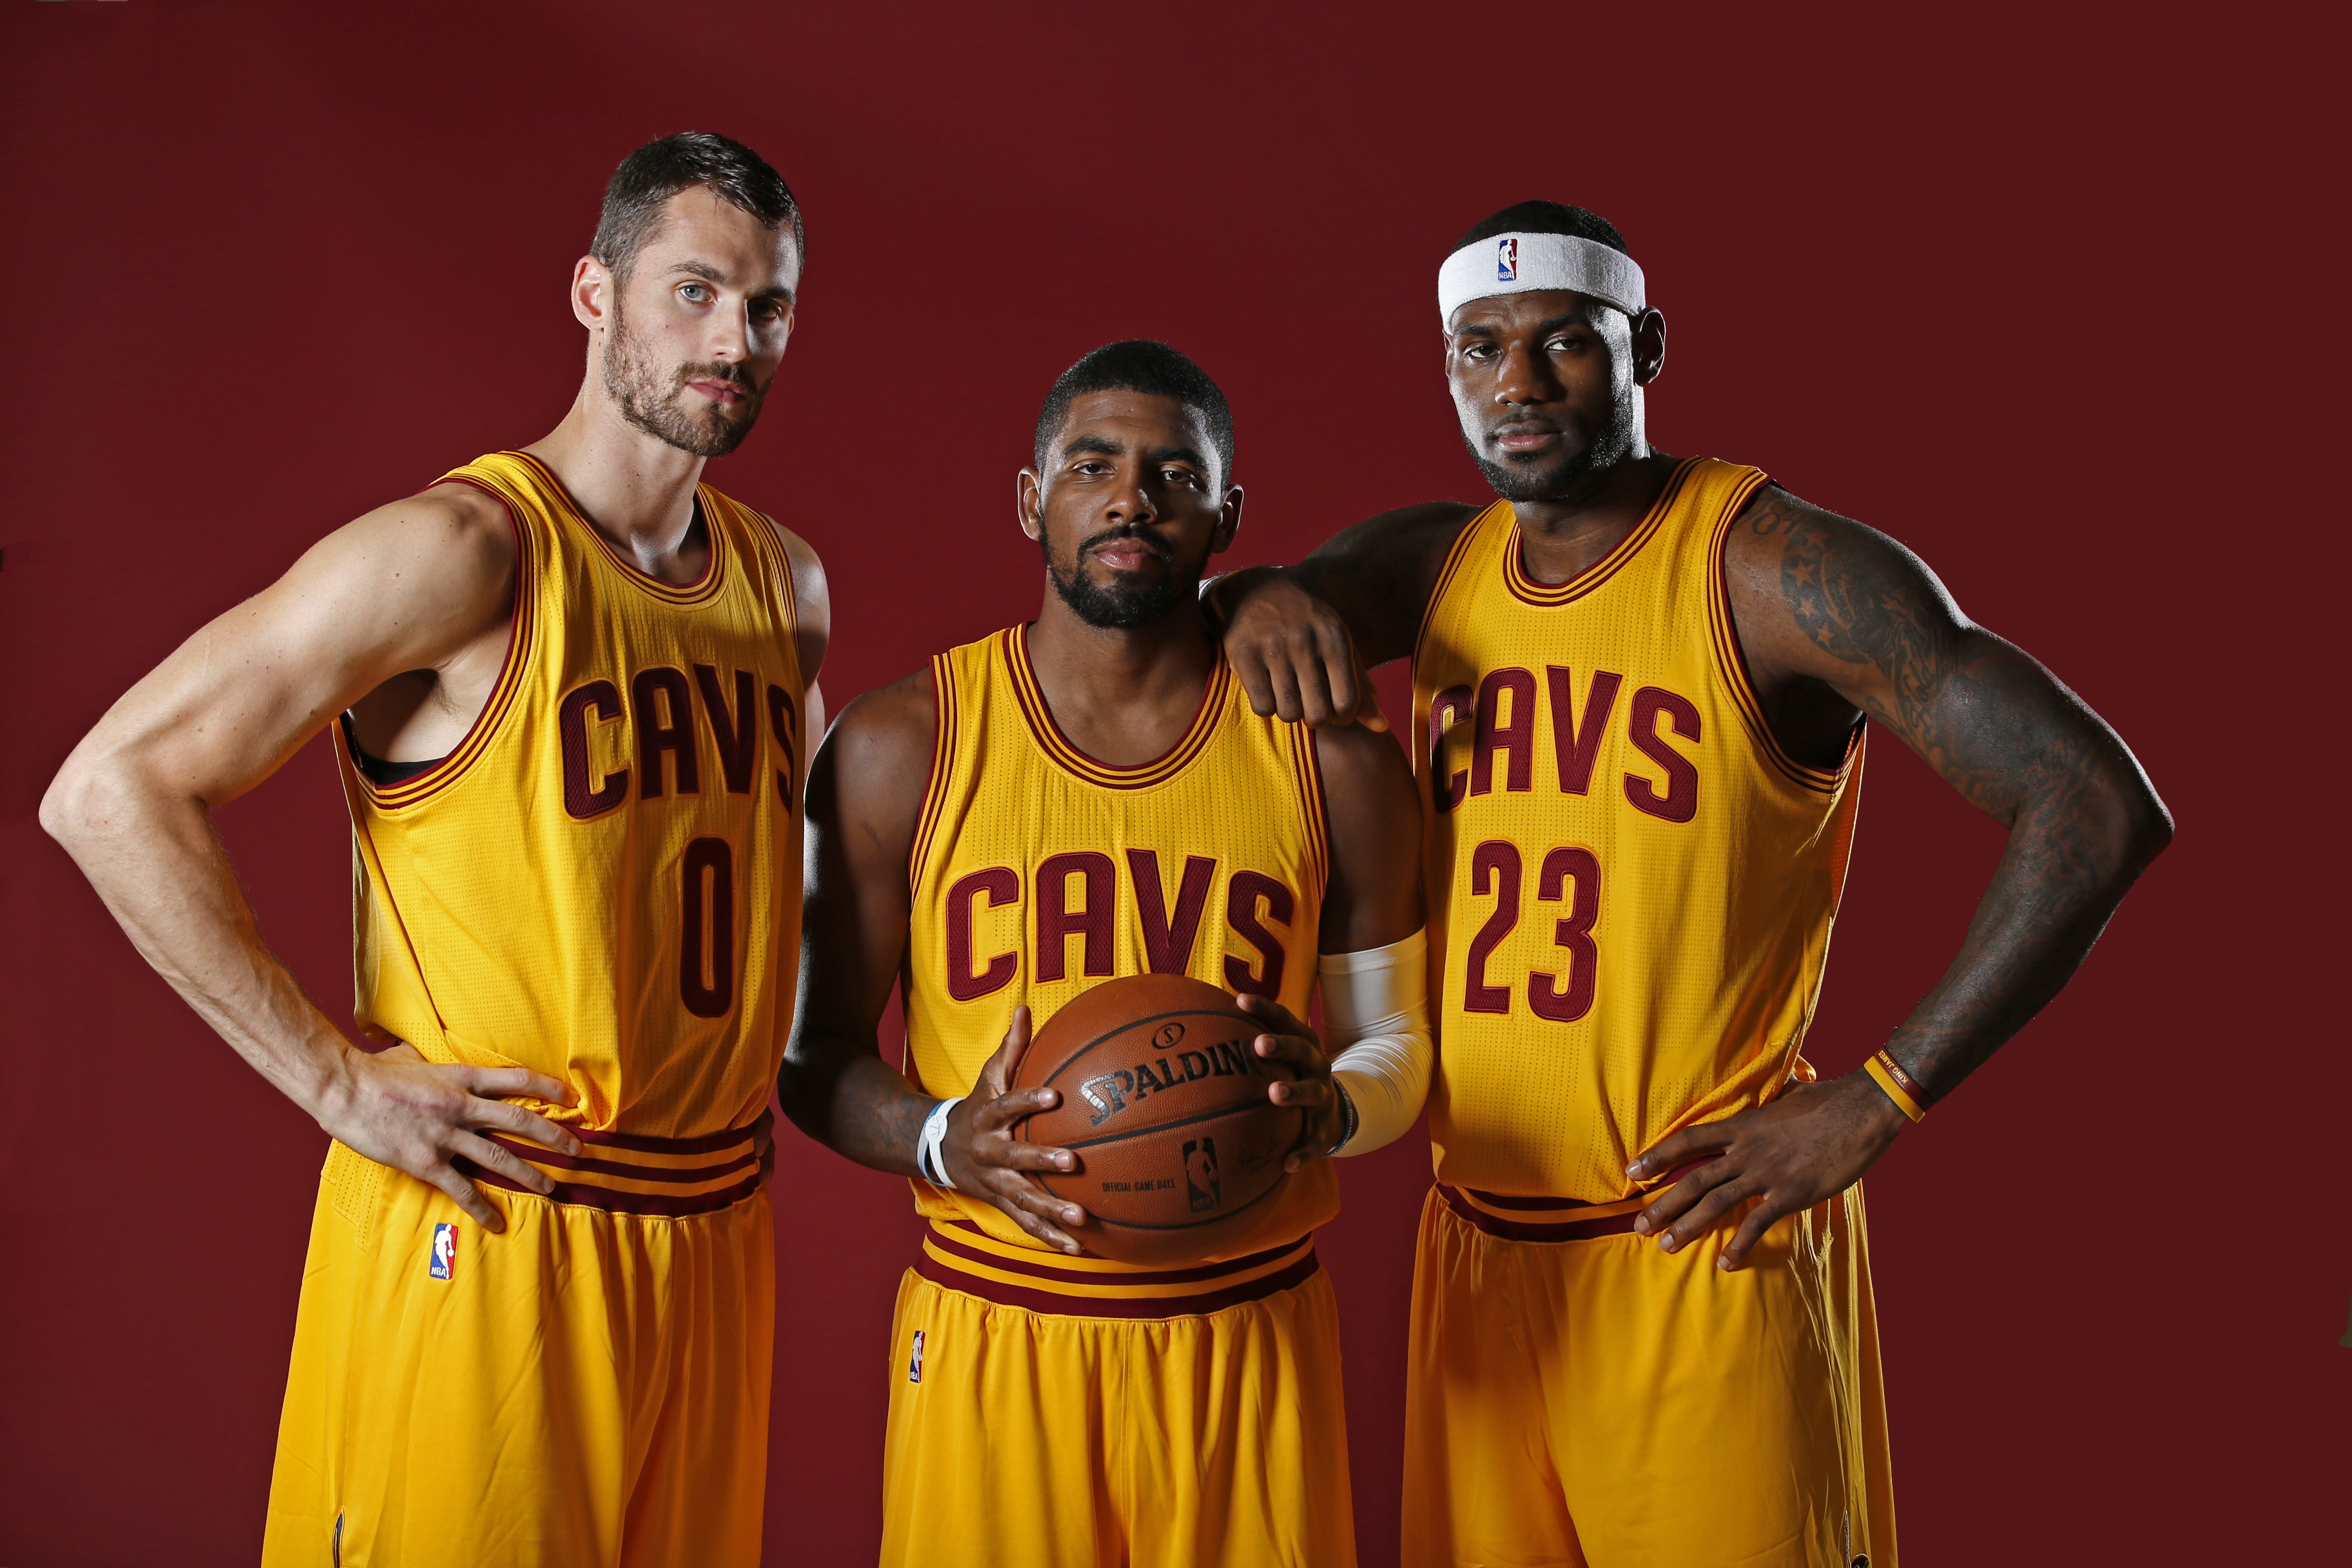 HD wallpaper: Kevin Love, Kyrie Irving and LeBron James